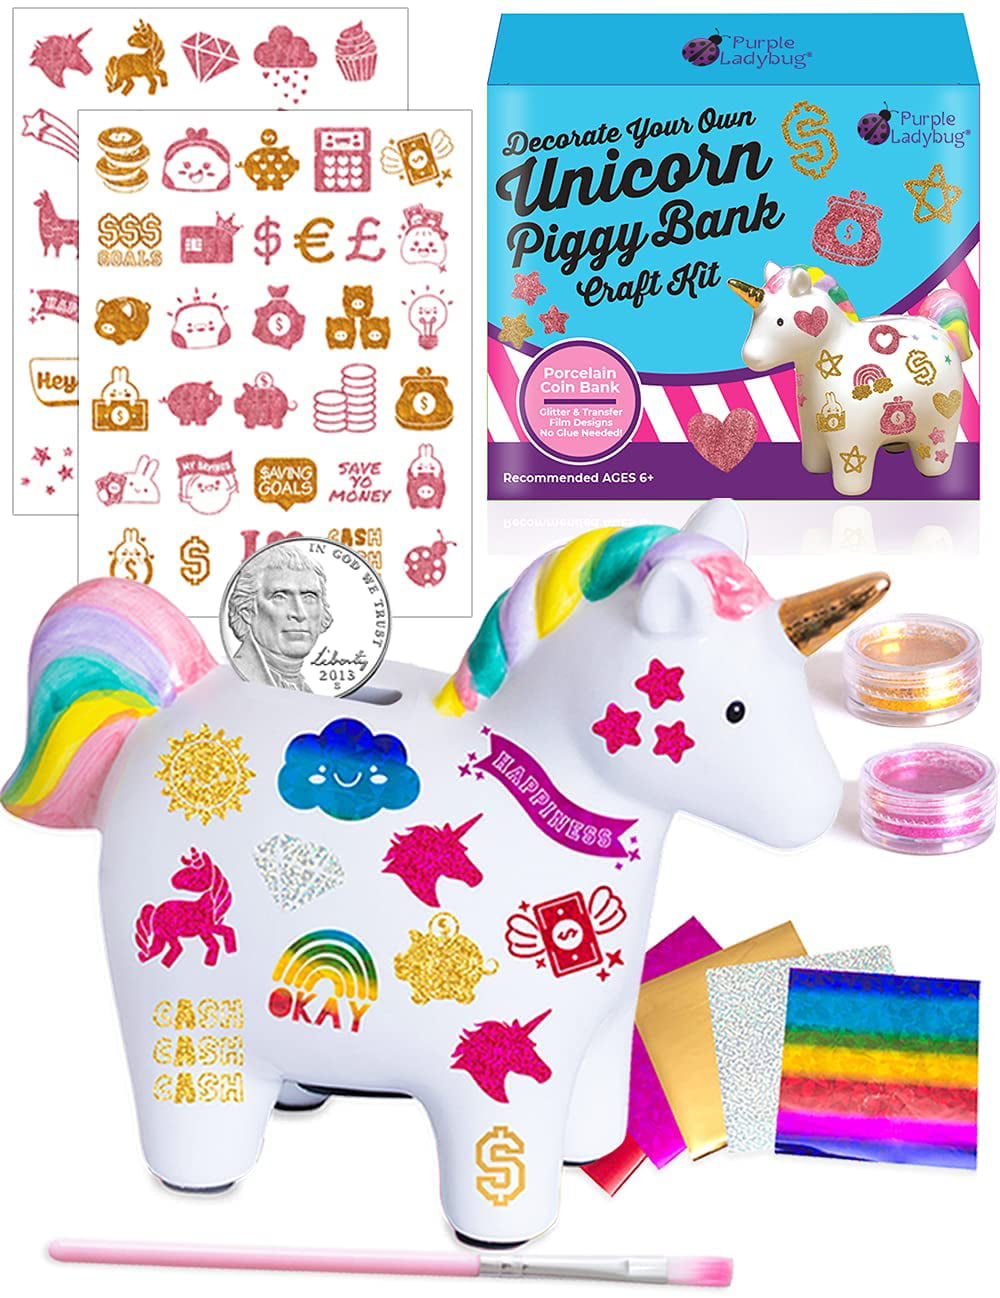 New Pink Unicorn Horse with Rainbow Mane & Tail Piggy Bank Coin Money Holder 